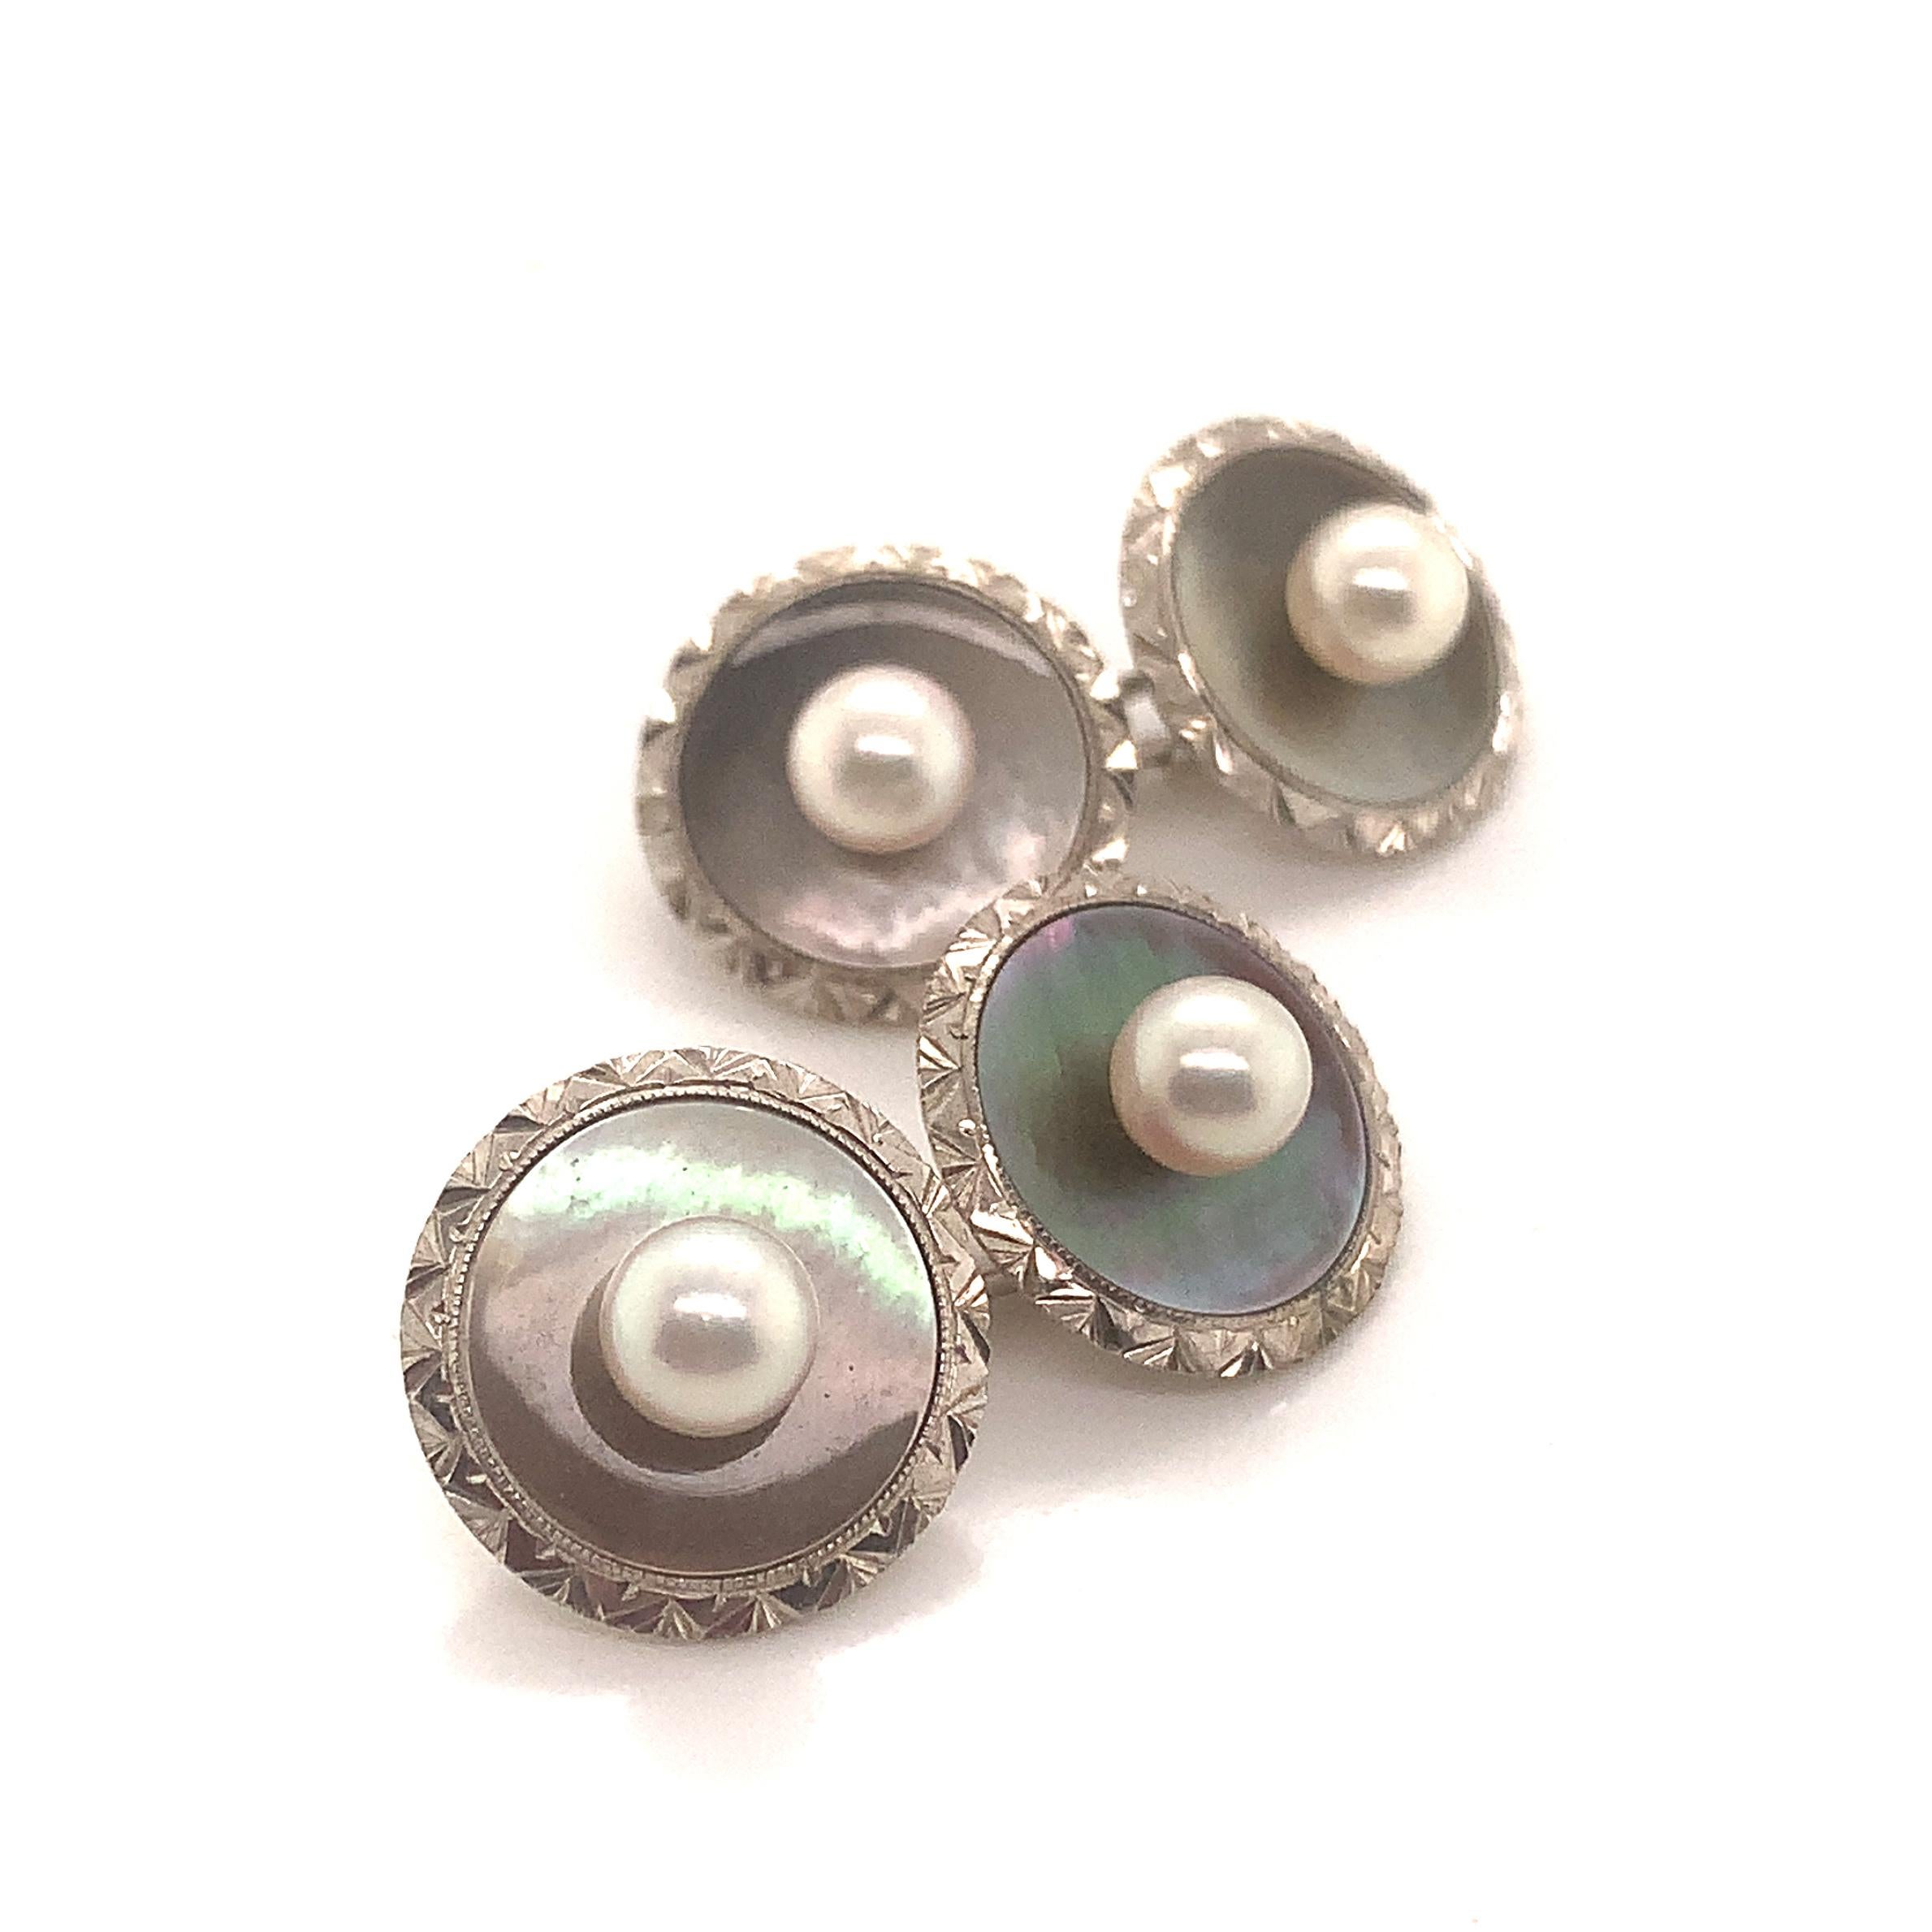 Mikimoto Estate Akoya Pearl Tuxedo Cufflinks Set Sterling Silver 5.5 mm 10.364g M222

Please look at the video attached for this item. With the video, you can see the movement of the item and appreciate the faceting and details better.

This elegant